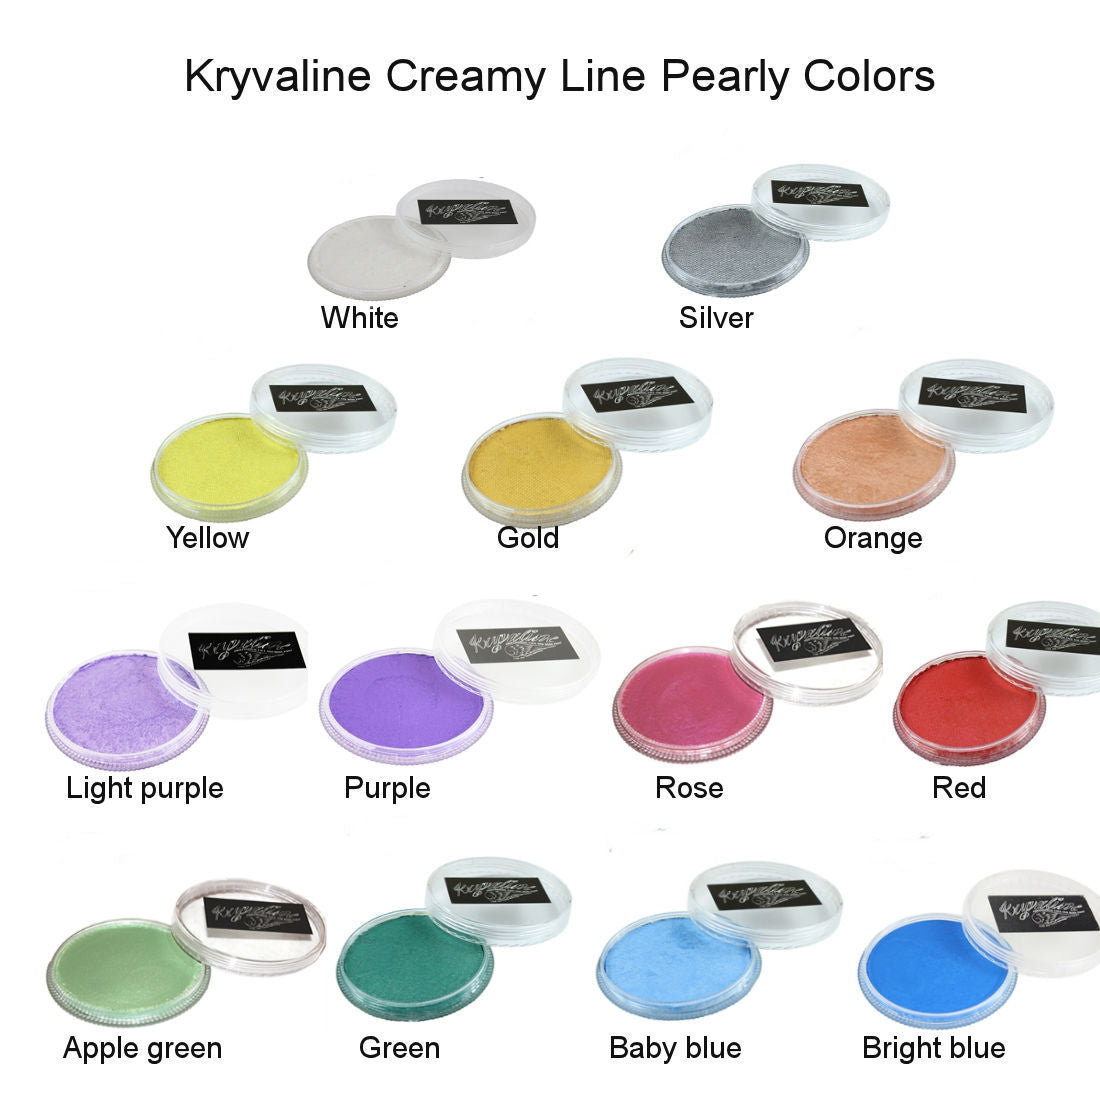 Kryvaline Face and body Paint Pearly Colors 30g Red - Kryvaline Body Art Makeup | Glitter Tattoos, Face & Body Paint, Design - Kryvaline Body Art Makeup